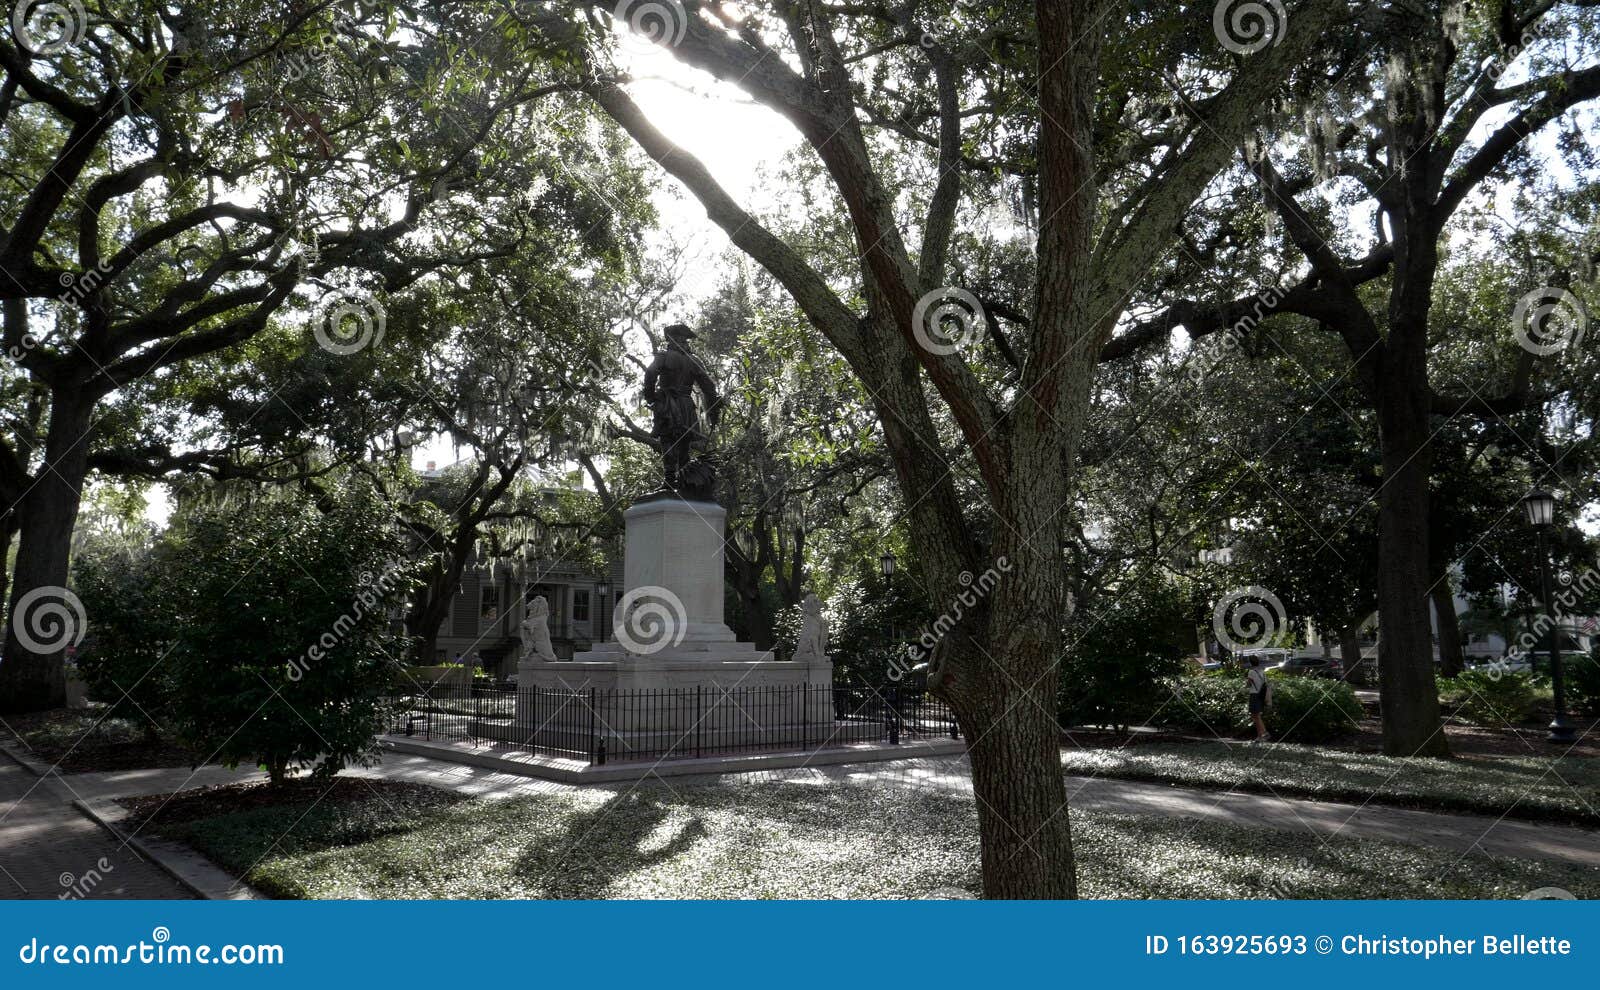 rear view of the oglethorpe statue at chippewa square in savannah